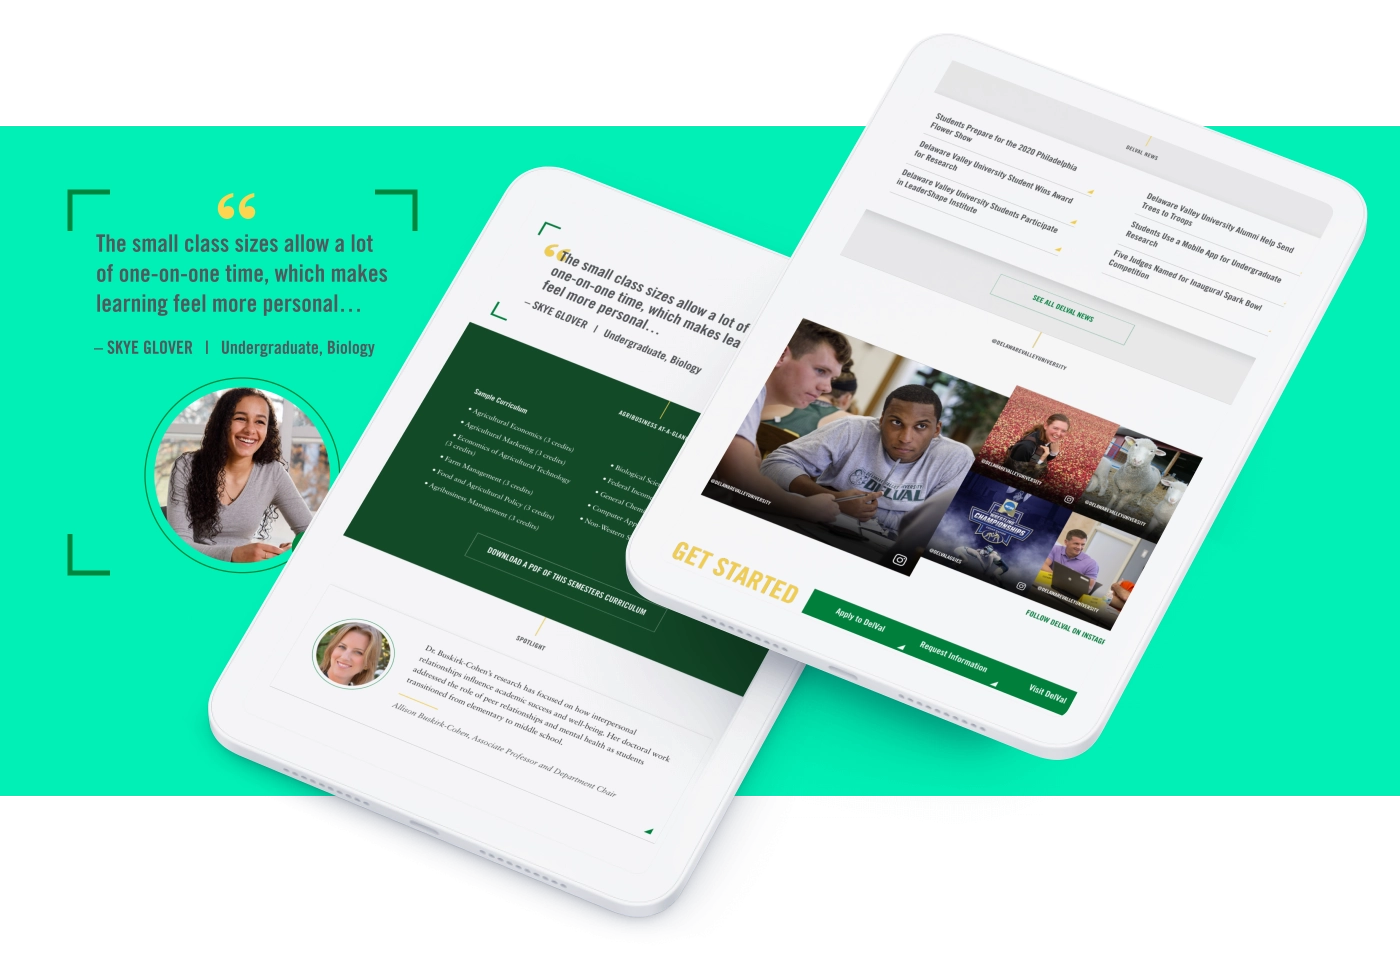 Two tablets show web pages featuring Delaware Valley University's program information, and a student quote describing the benefits of small class sizes